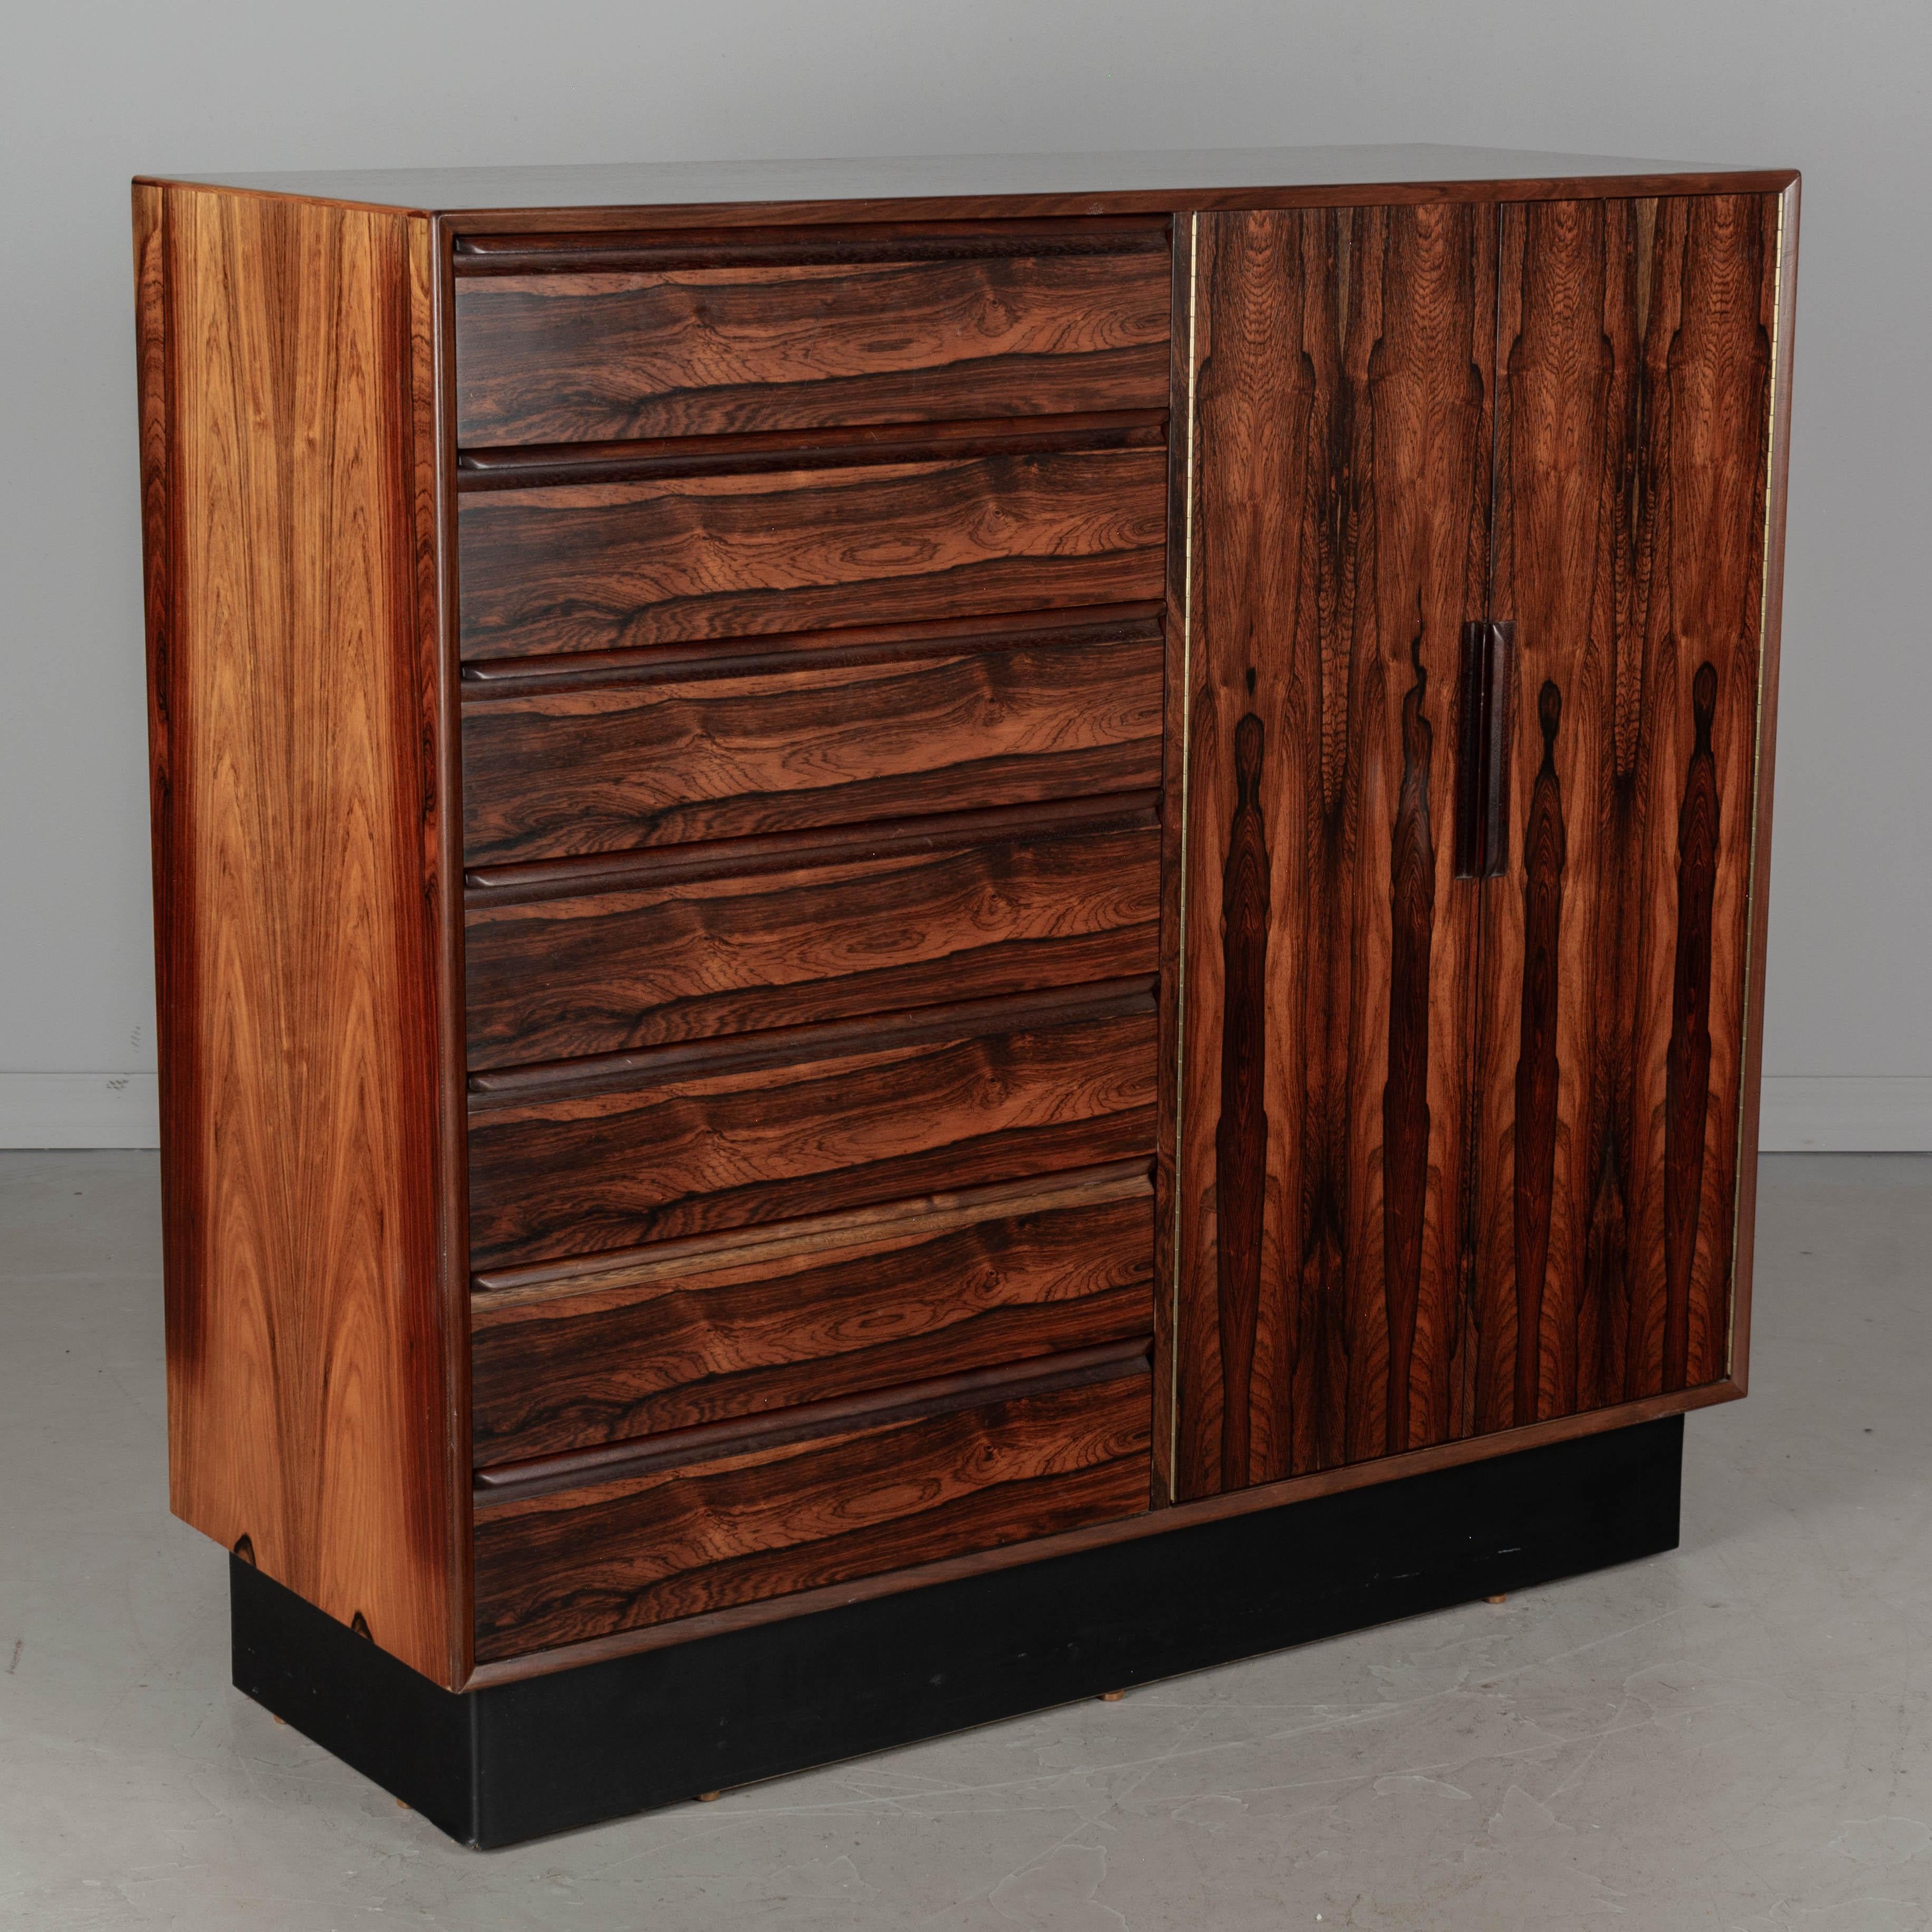 A Midcentury Scandinavian Modern gentleman's chest by Westnofa Furniture. Book matched rosewood veneer with beautifully patterned wood grain. This tall dresser has seven dovetailed drawers on the left and two doors which open to reveal seven